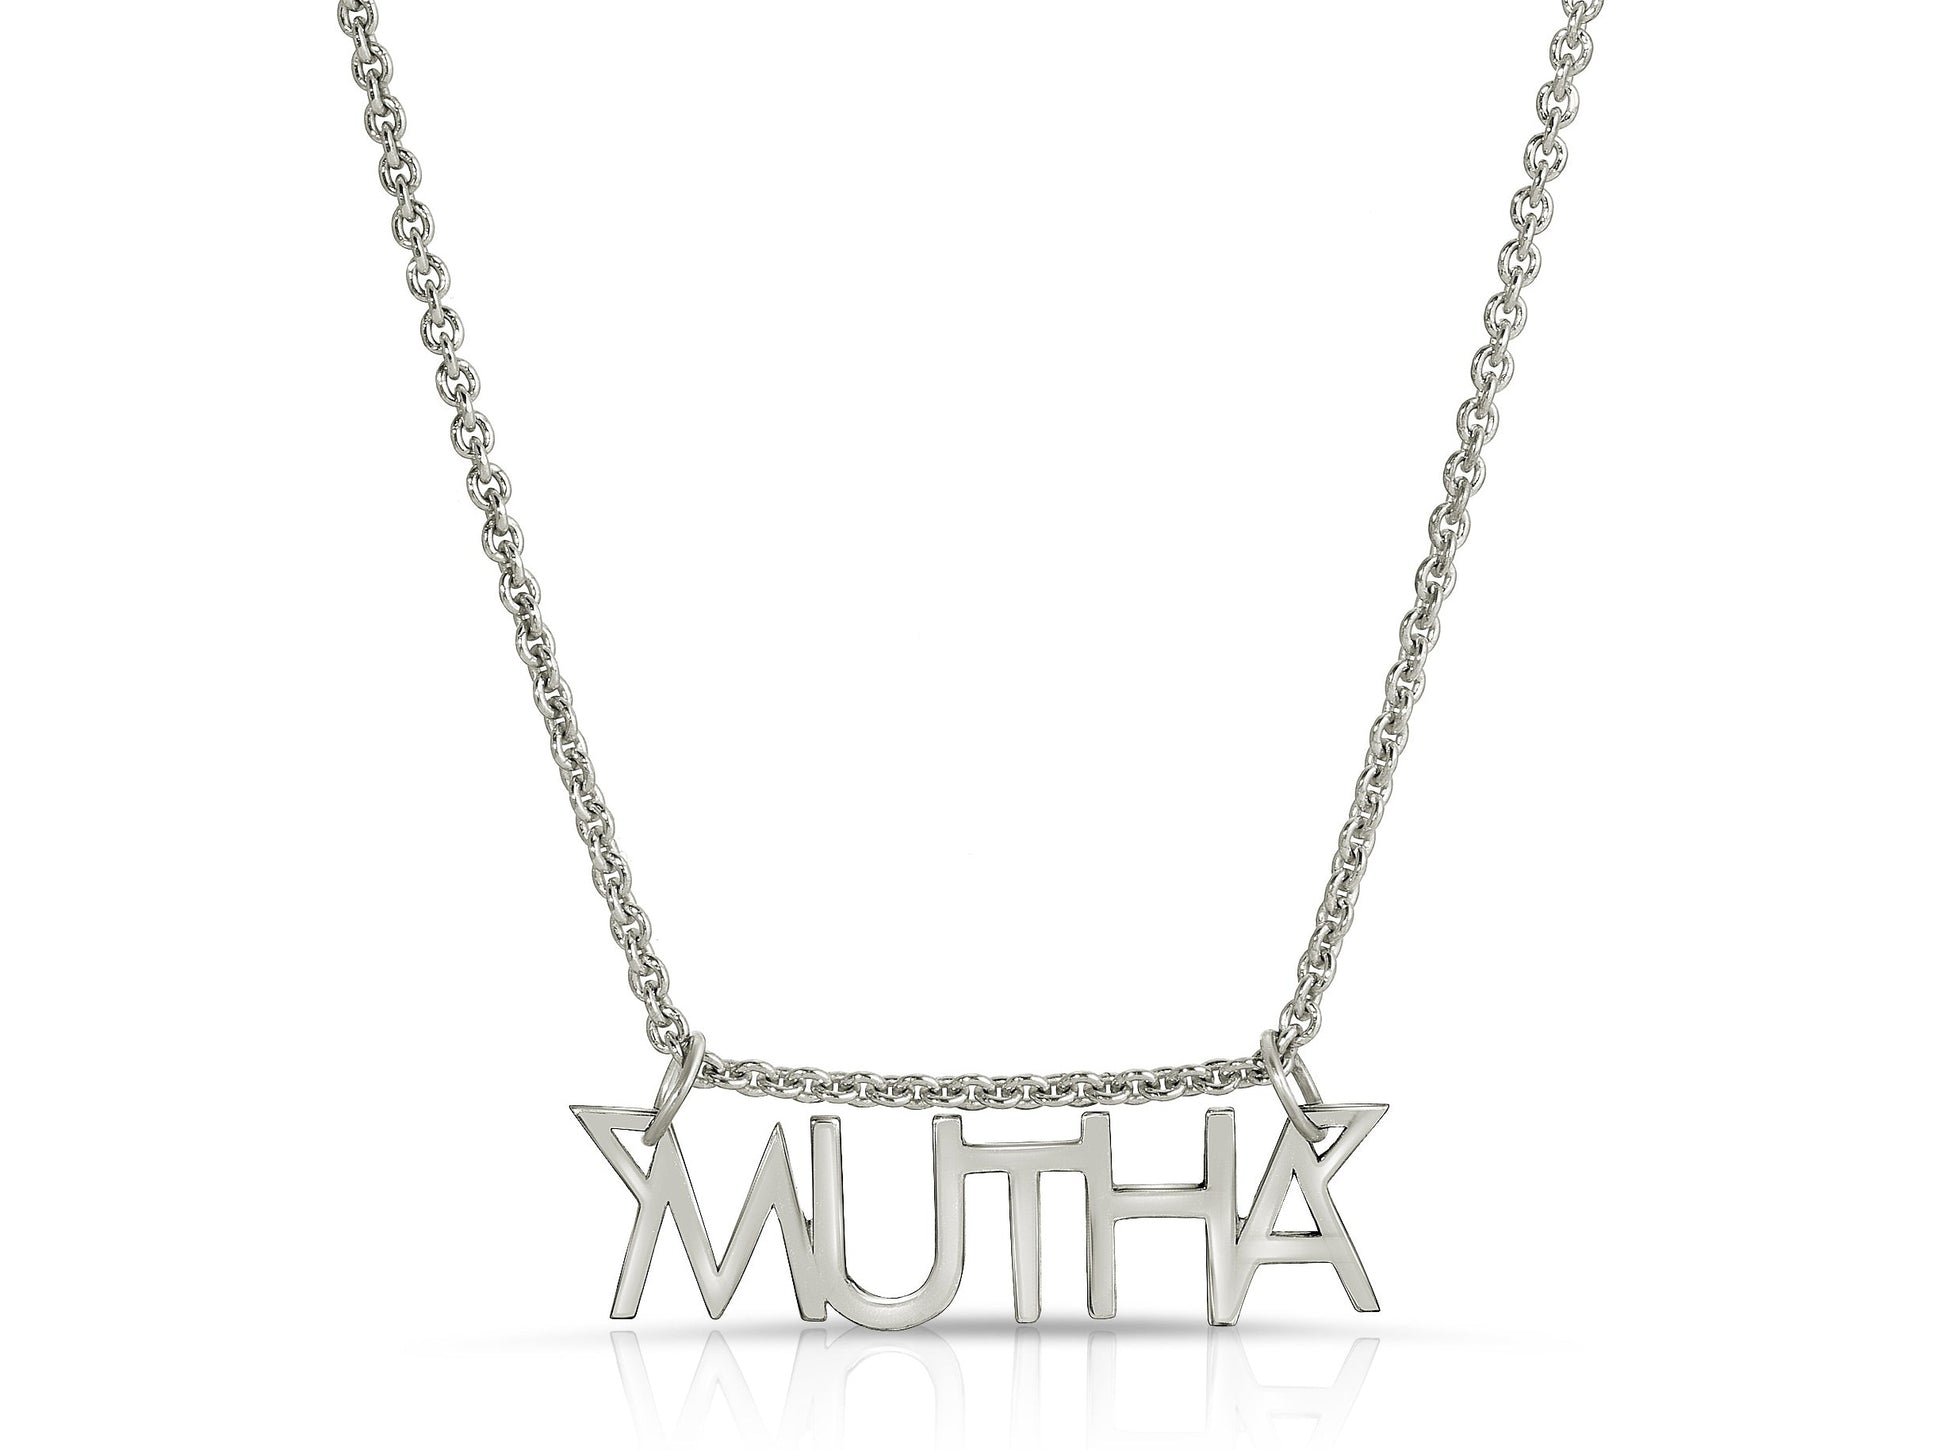 Mutha necklace in white gold